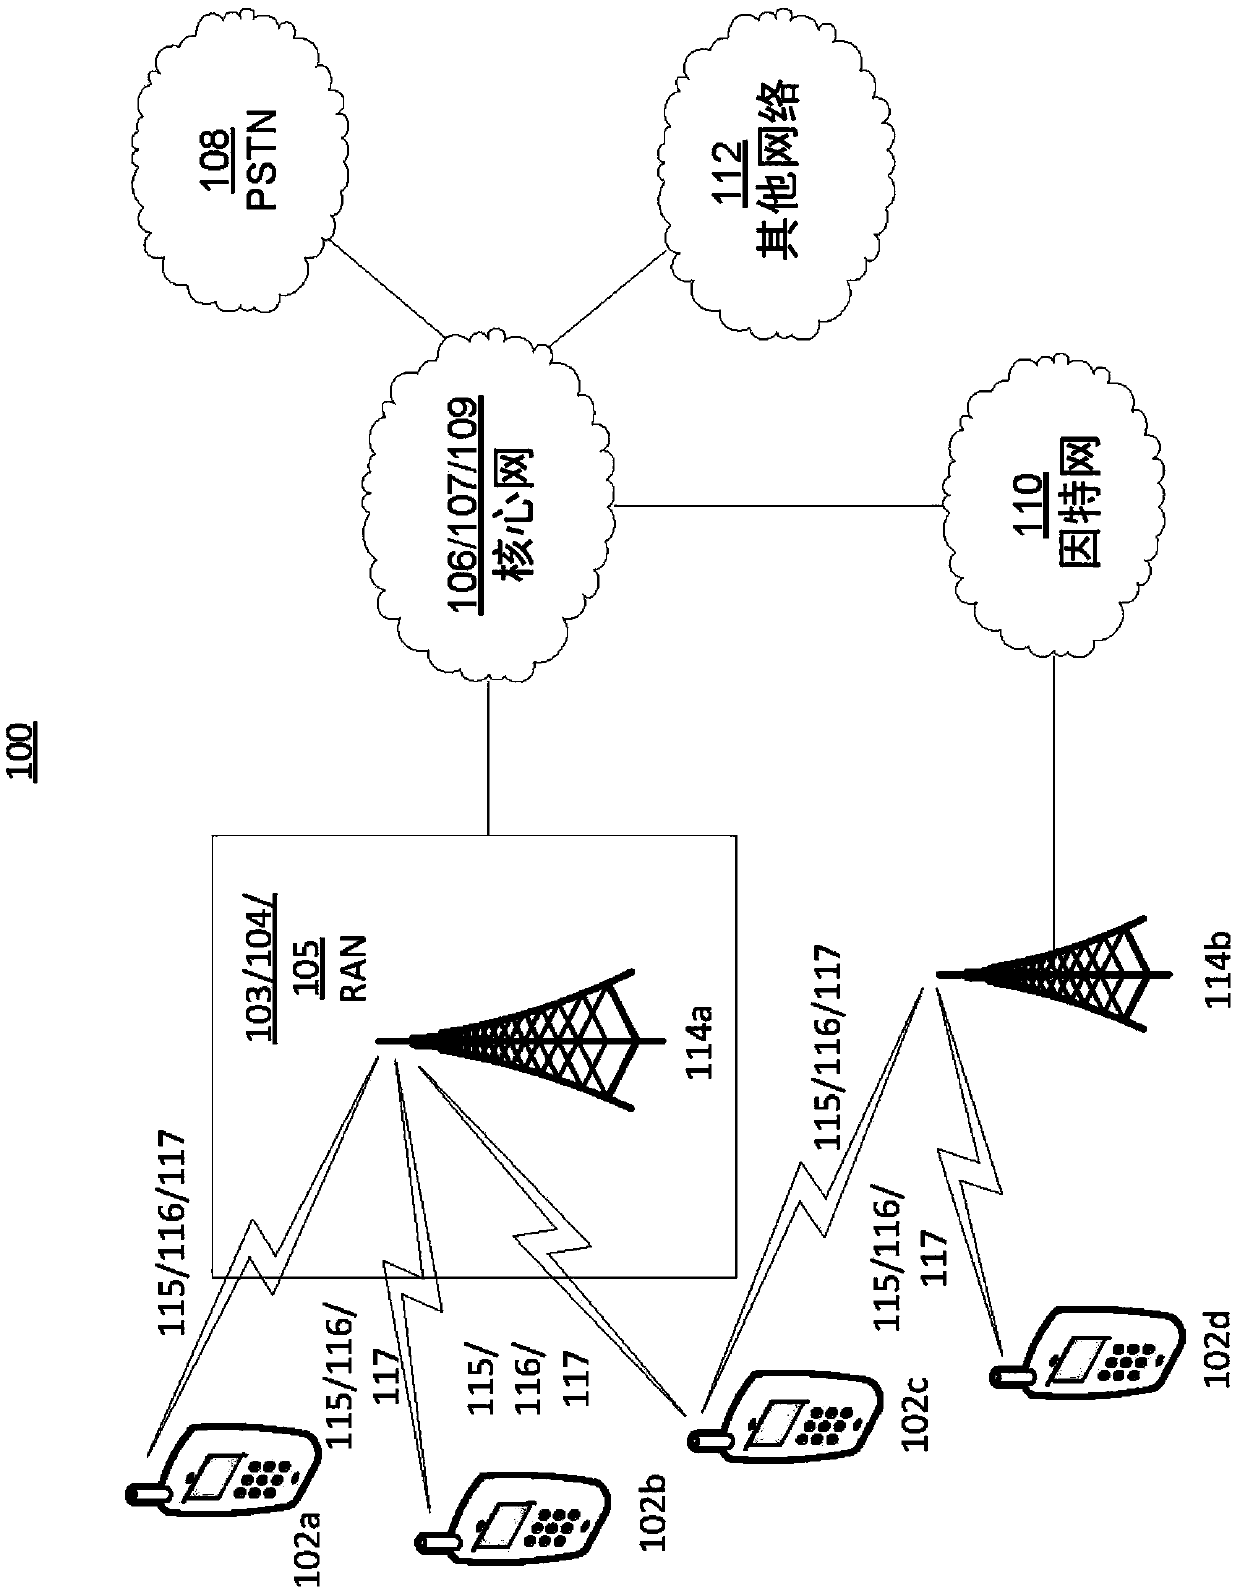 Control signaling in LTE carrier aggregation